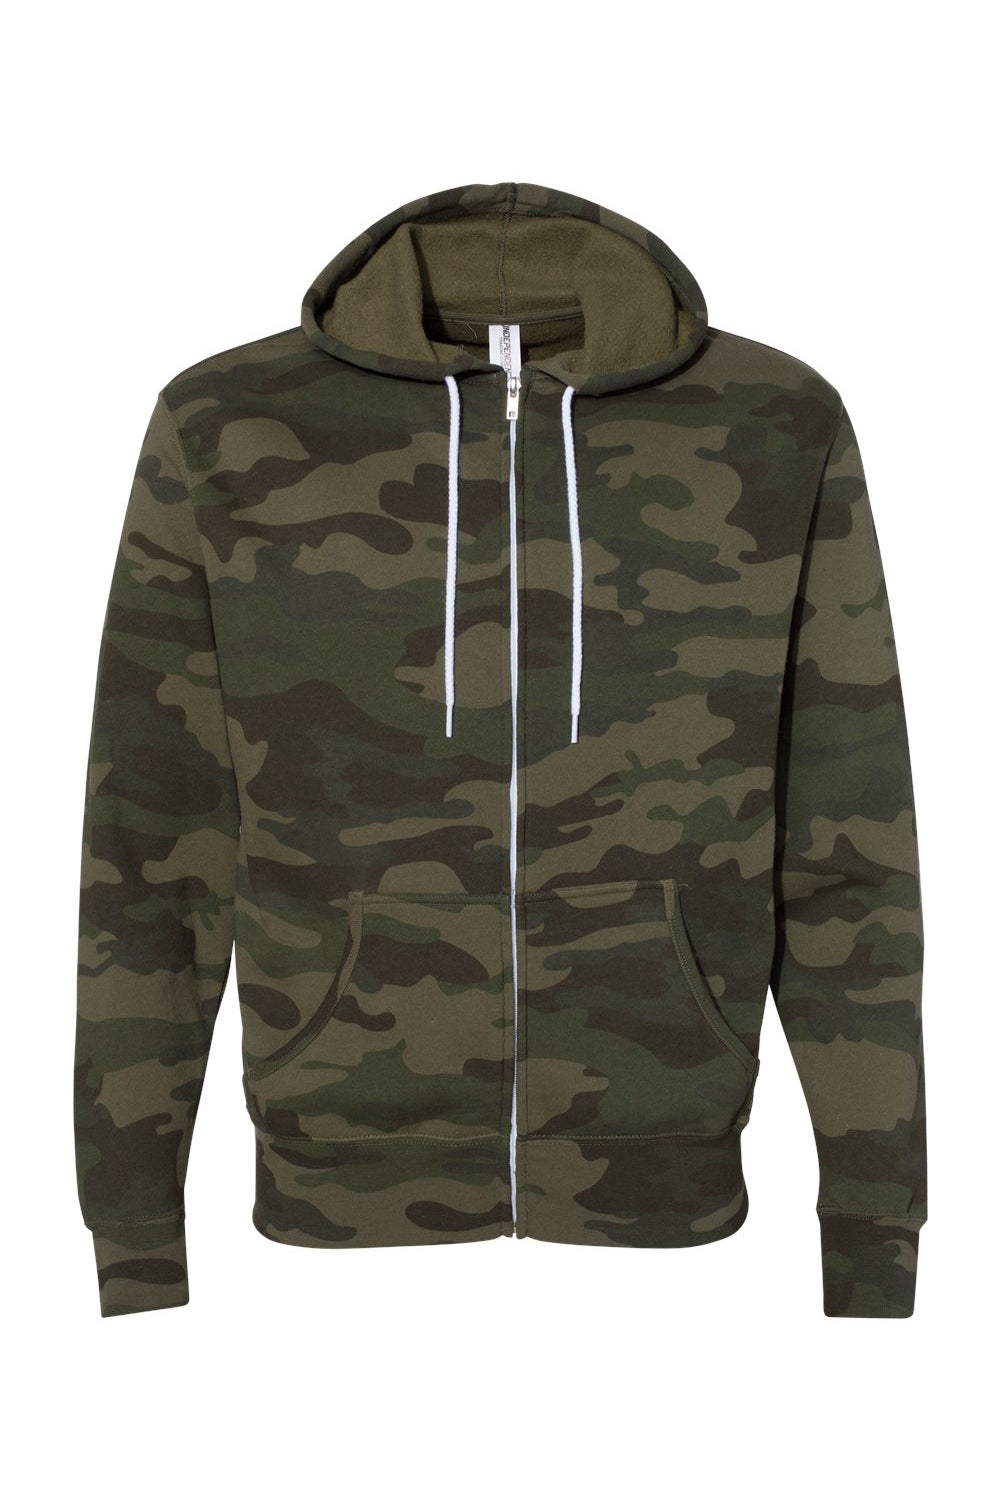 Independent Trading Co. AFX90UNZ Mens Full Zip Hooded Sweatshirt Hoodie Forest Green Camo Flat Front